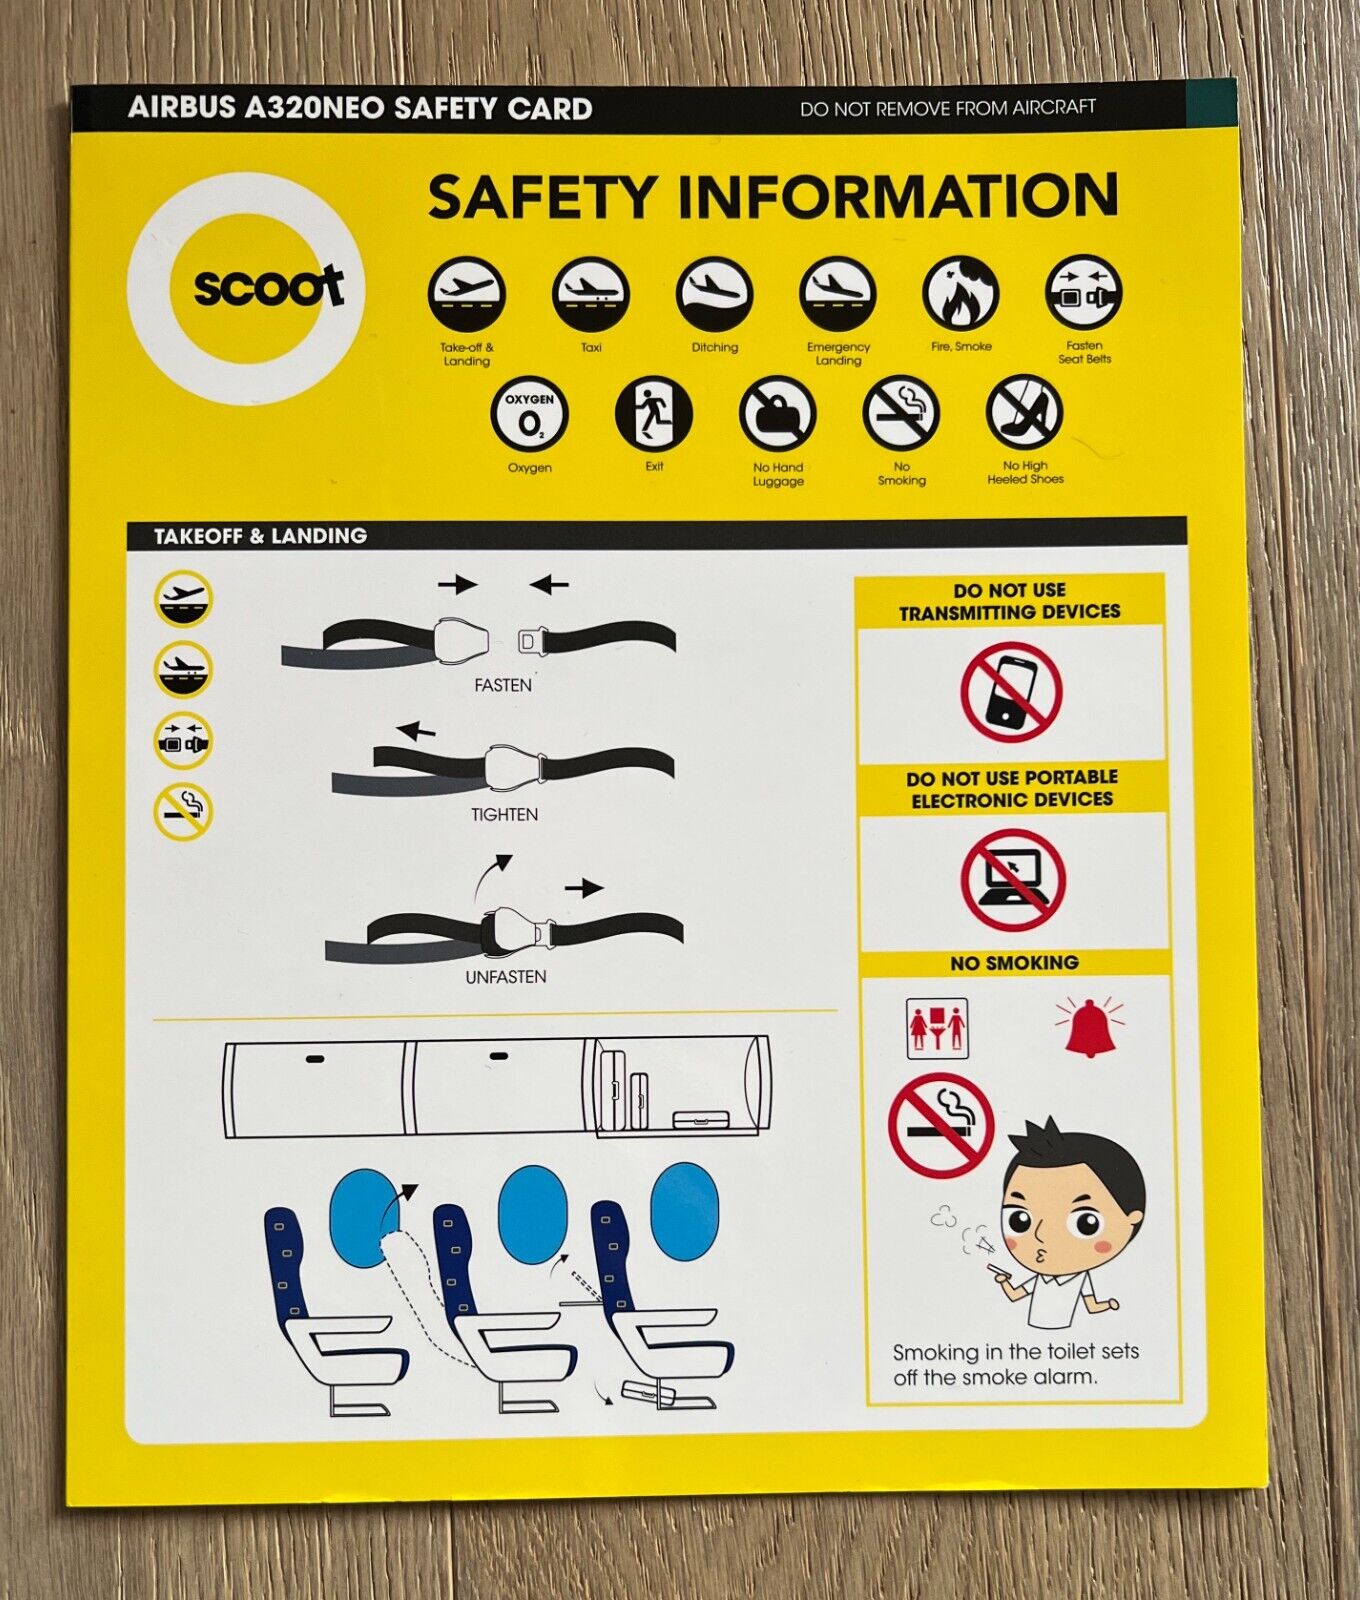 SCOOT A320NEO SAFETY CARD 31MAR2022